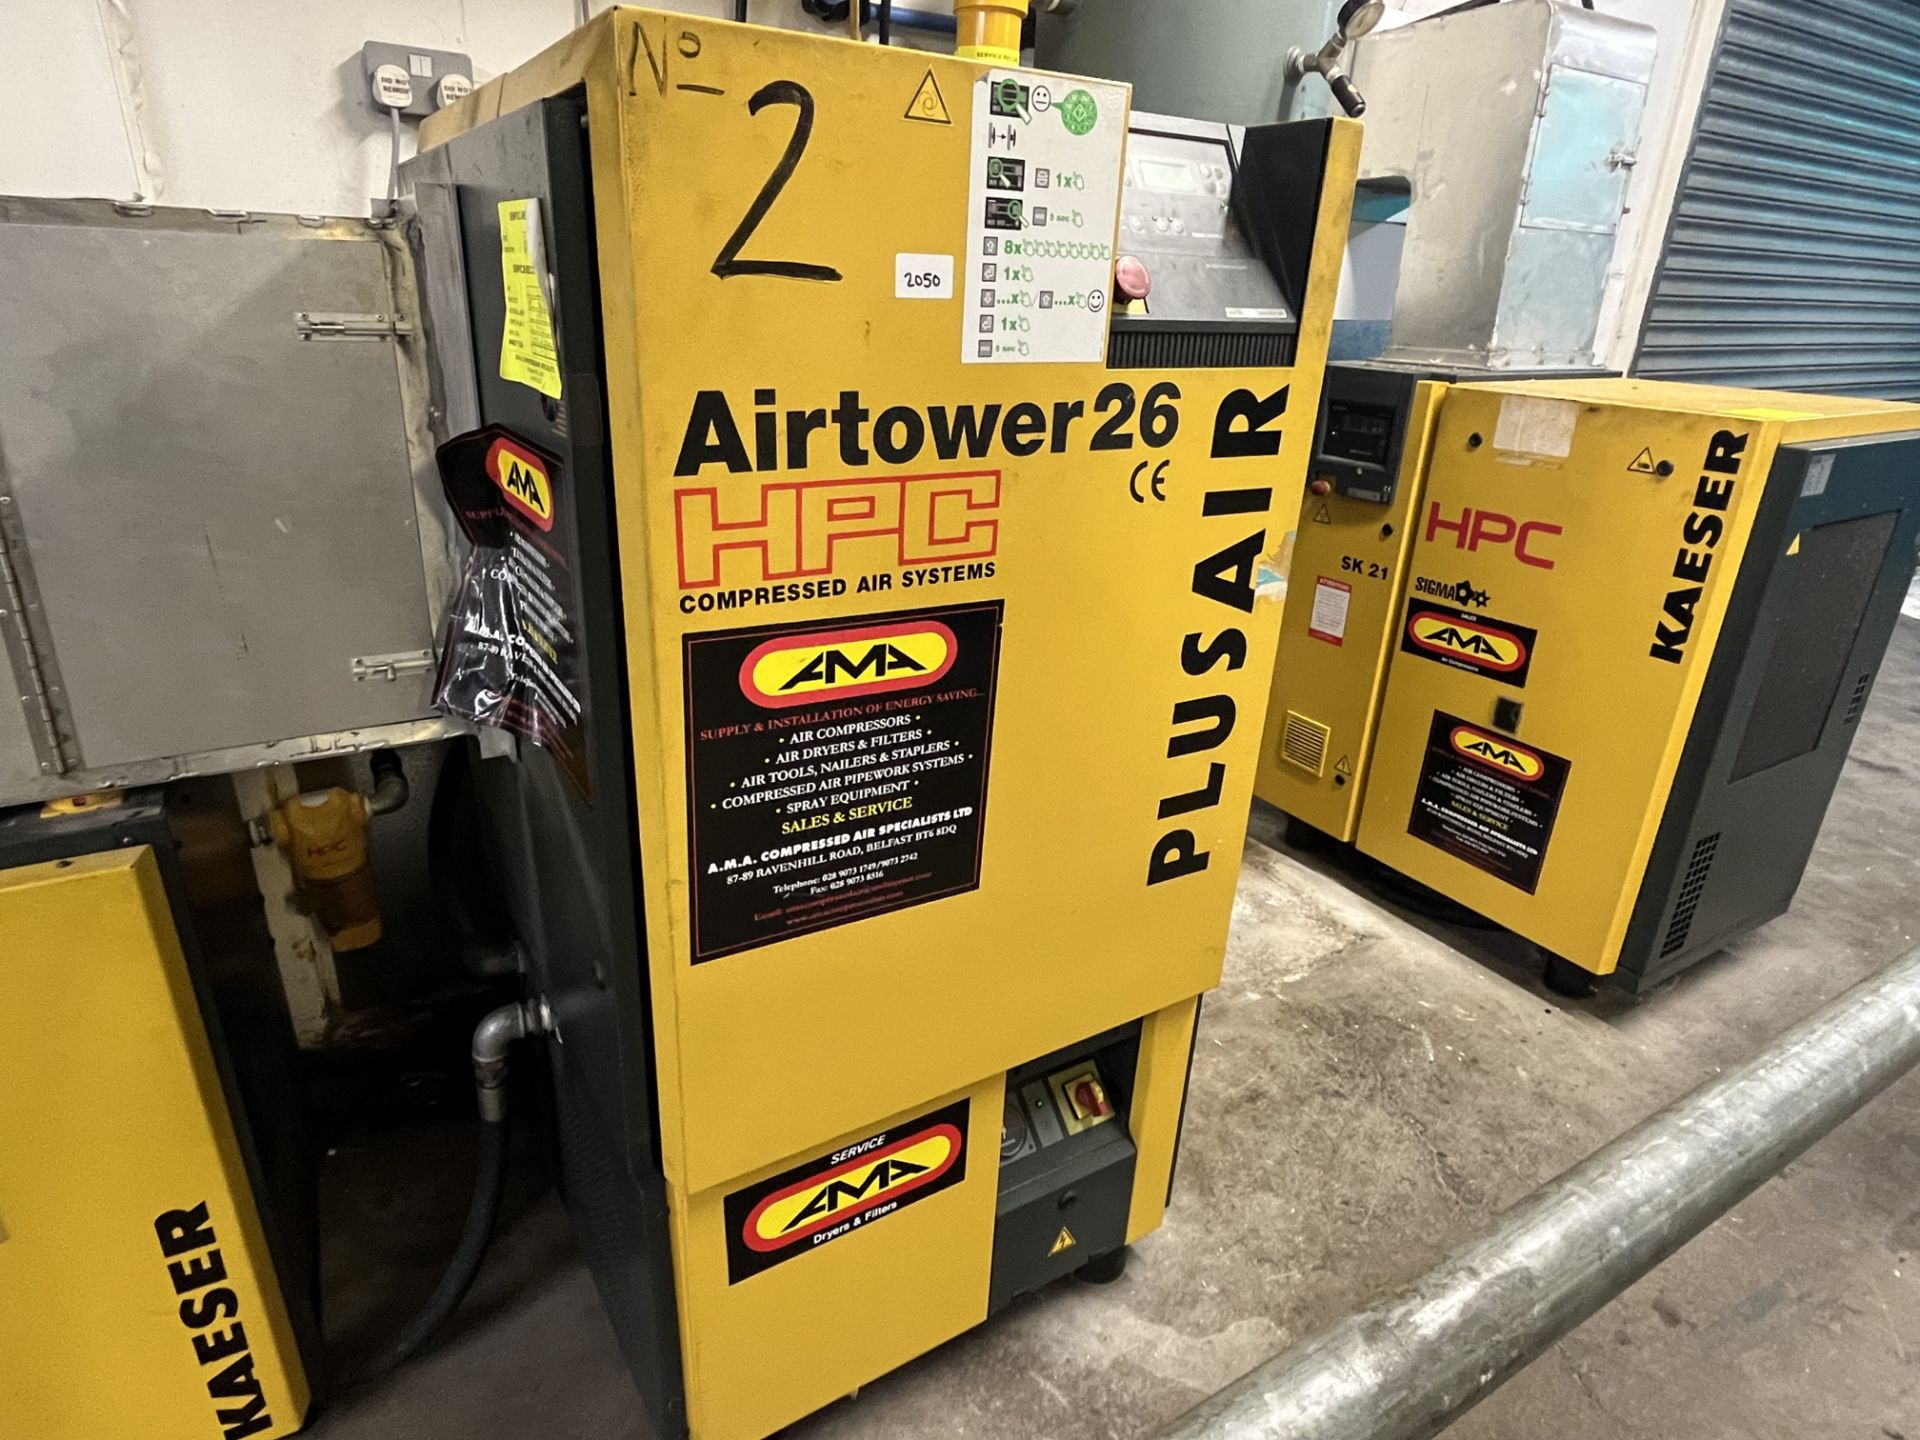 HPC AIRTOWER 26 COMPRESSOR  COMPRESSOR  COLLECTION ARMAGH N.IRELAND